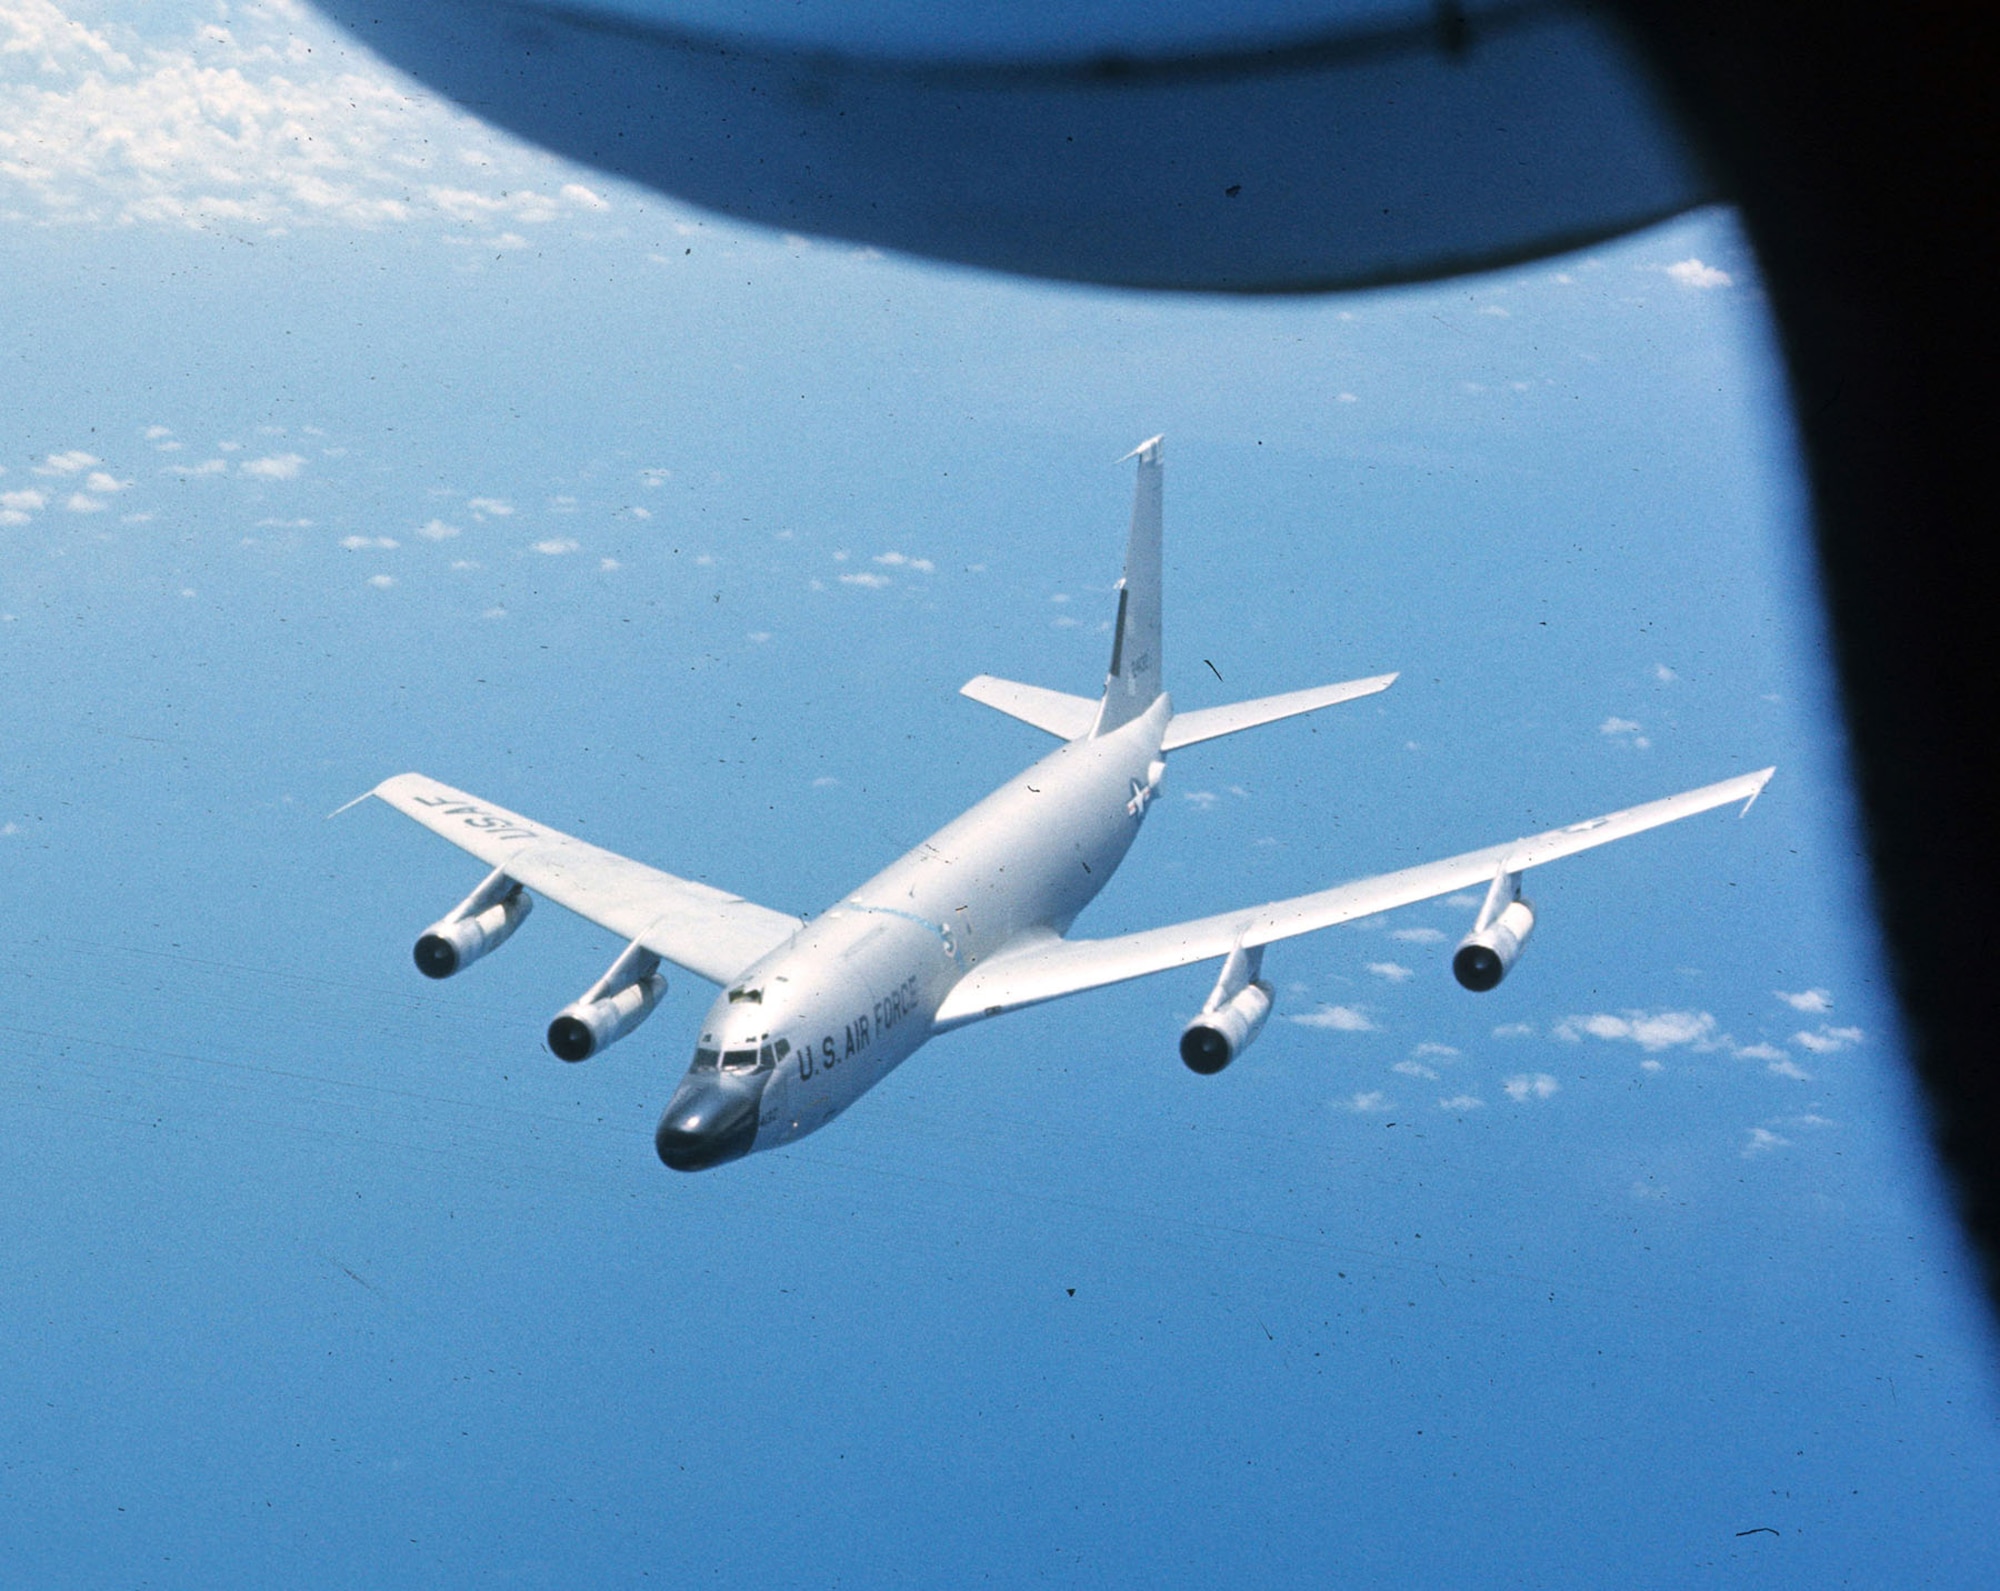 Highly-capable RC-135s -- like this RC-135M COMBAT APPLE aircraft -- conducted communications and electronic intelligence. For most of the Southeas Asia War, unarmed RC-135s maintained a continuous, 24-hour orbit near the border of North Vietnam. (U.S. Air Force photo)